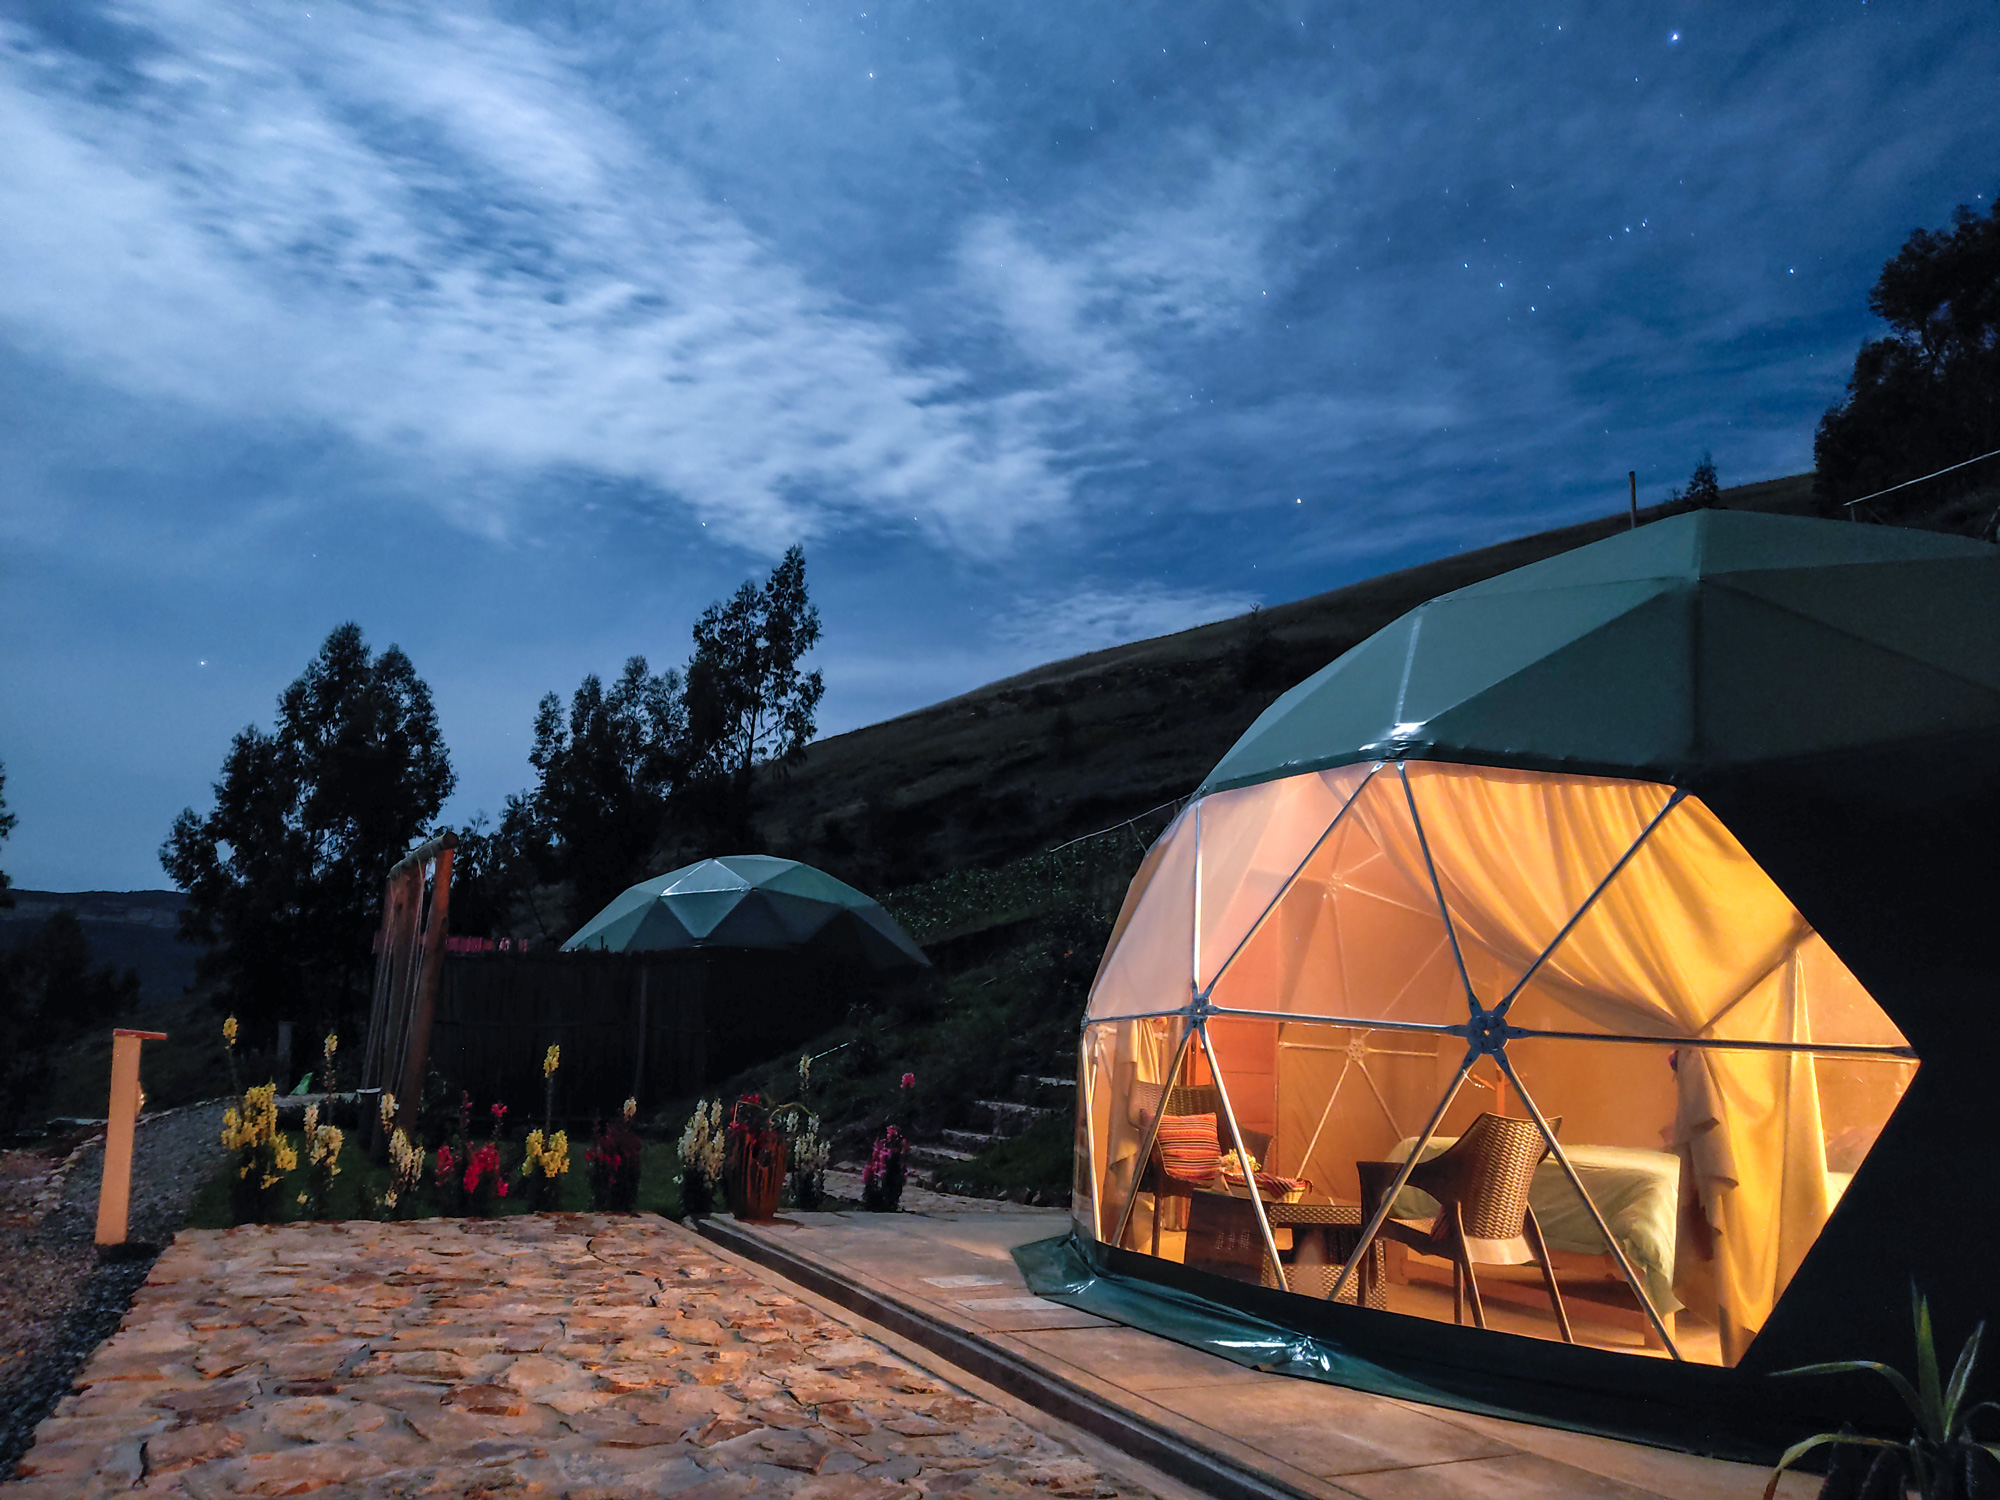 Domos noche hotel pacucha glamping